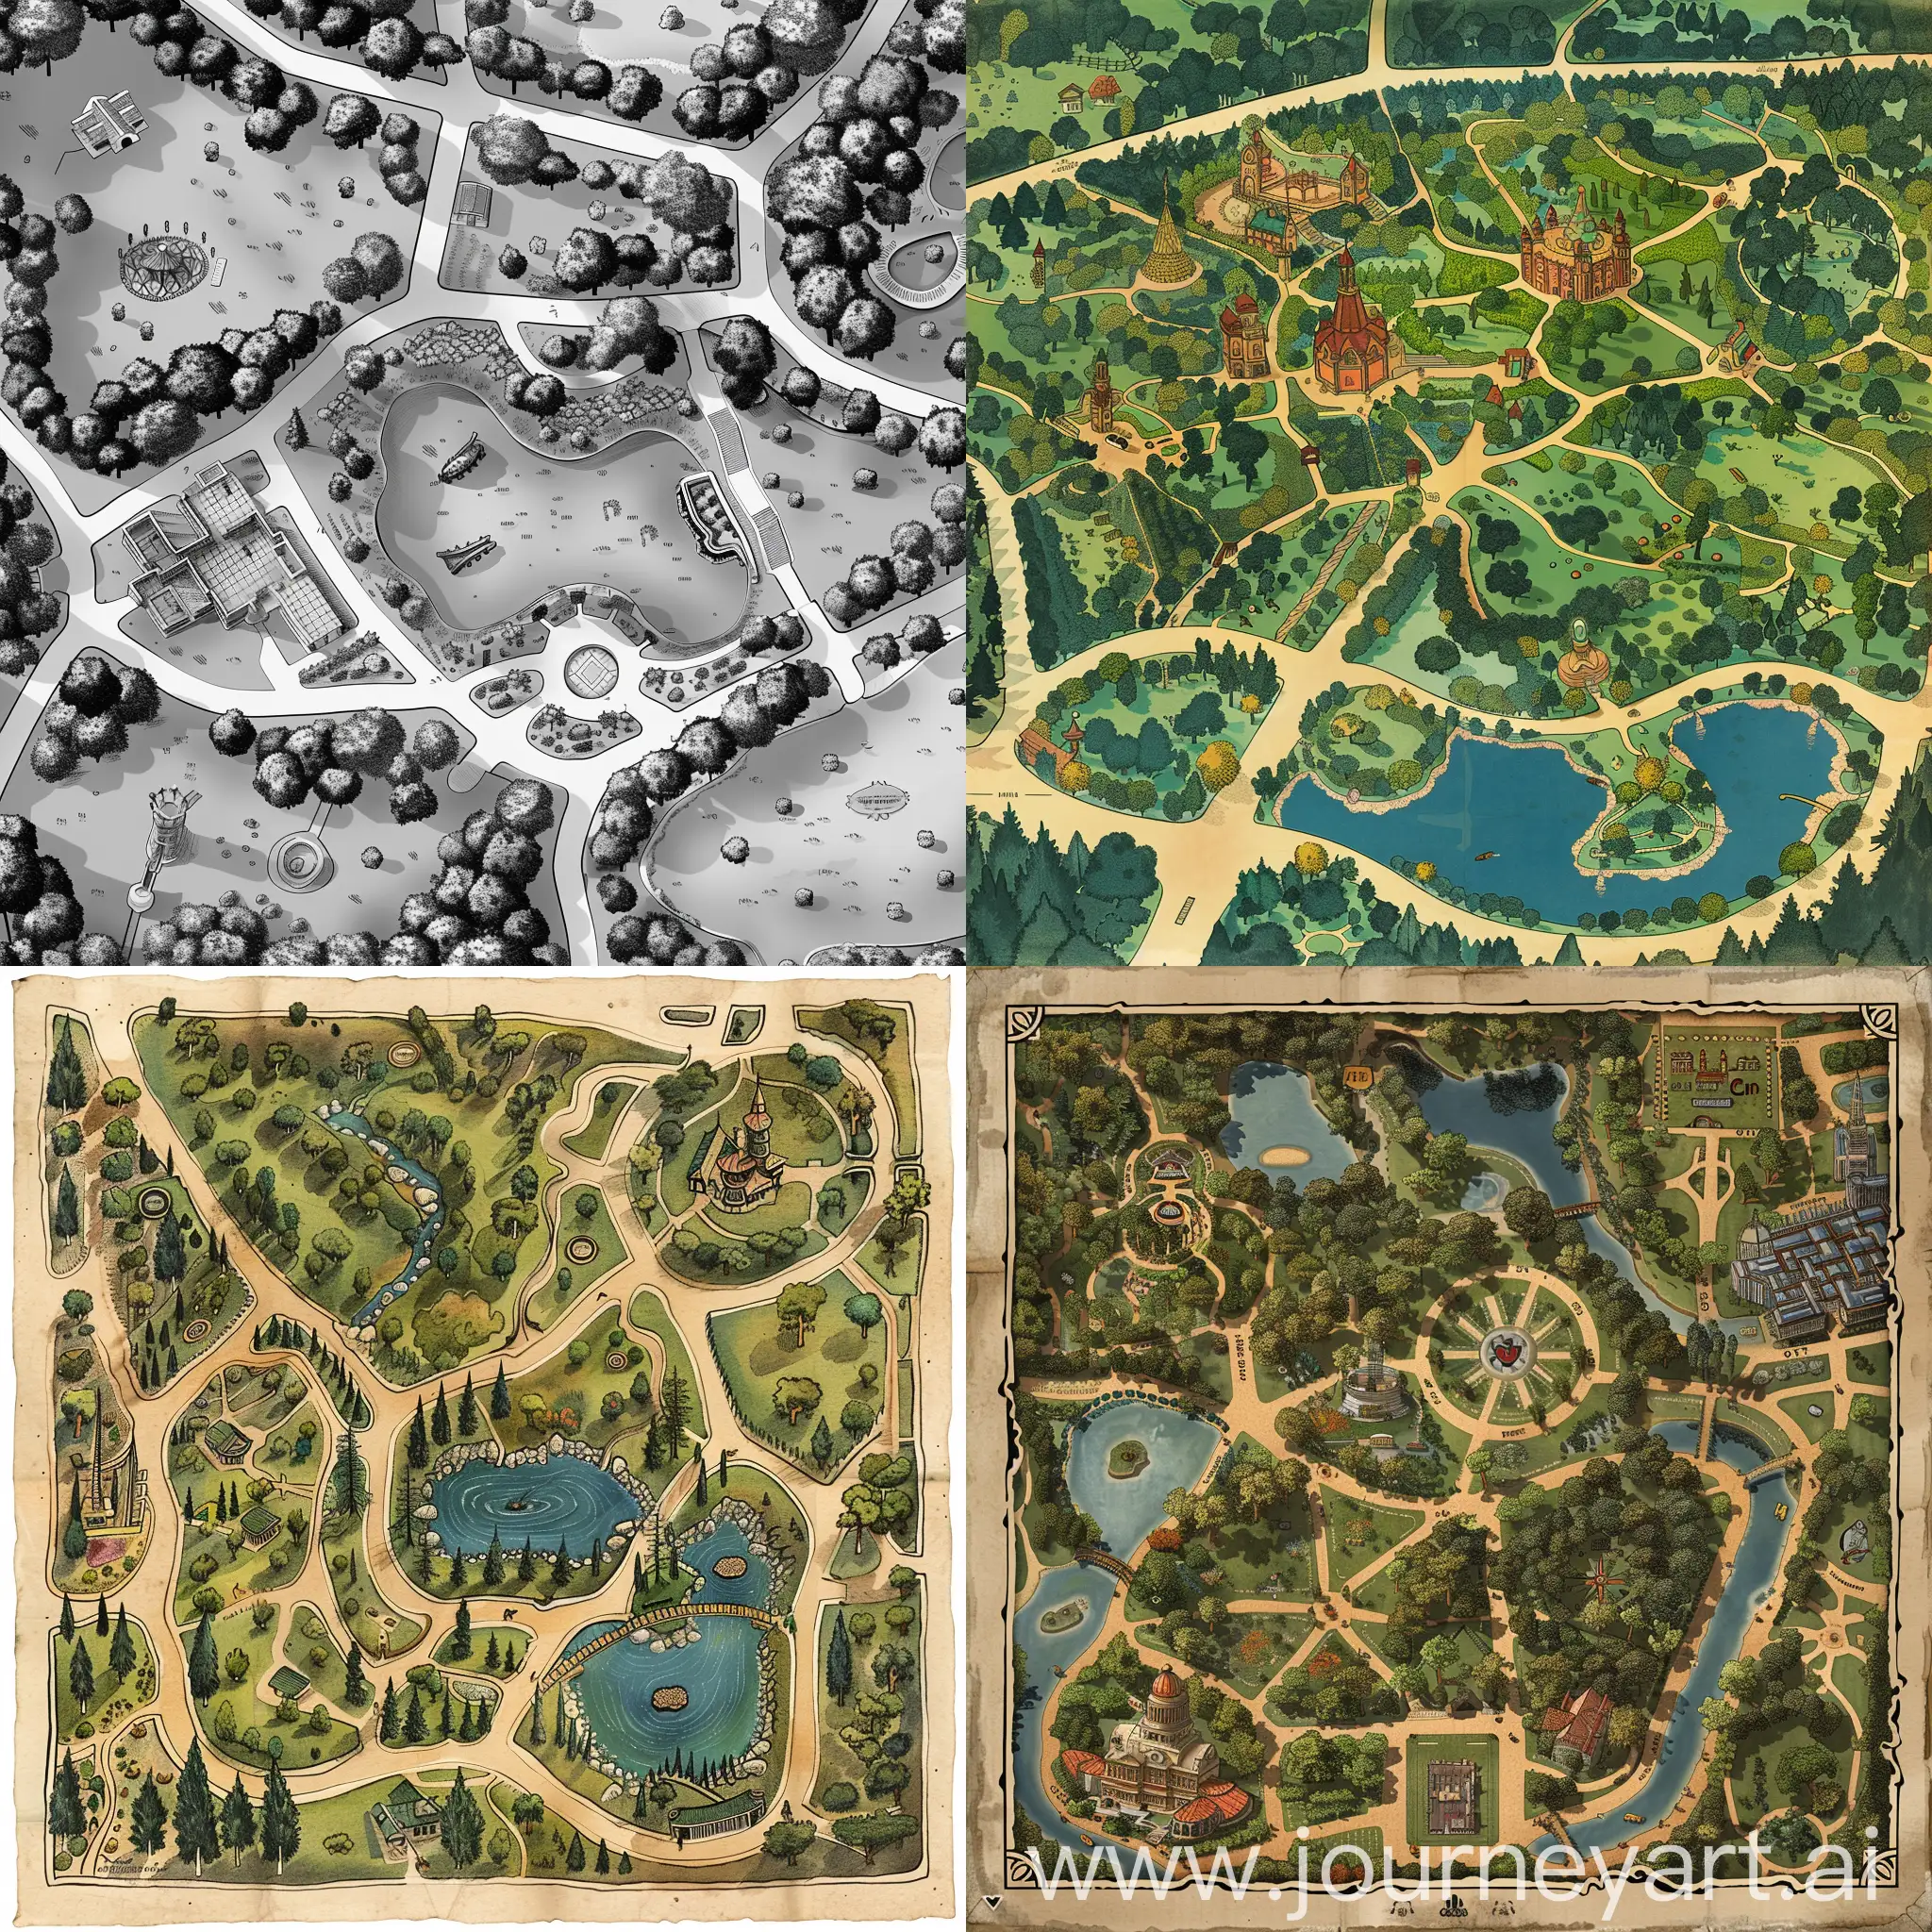 Navigational-Map-of-Park-with-Versatile-Features-and-Geometric-Design